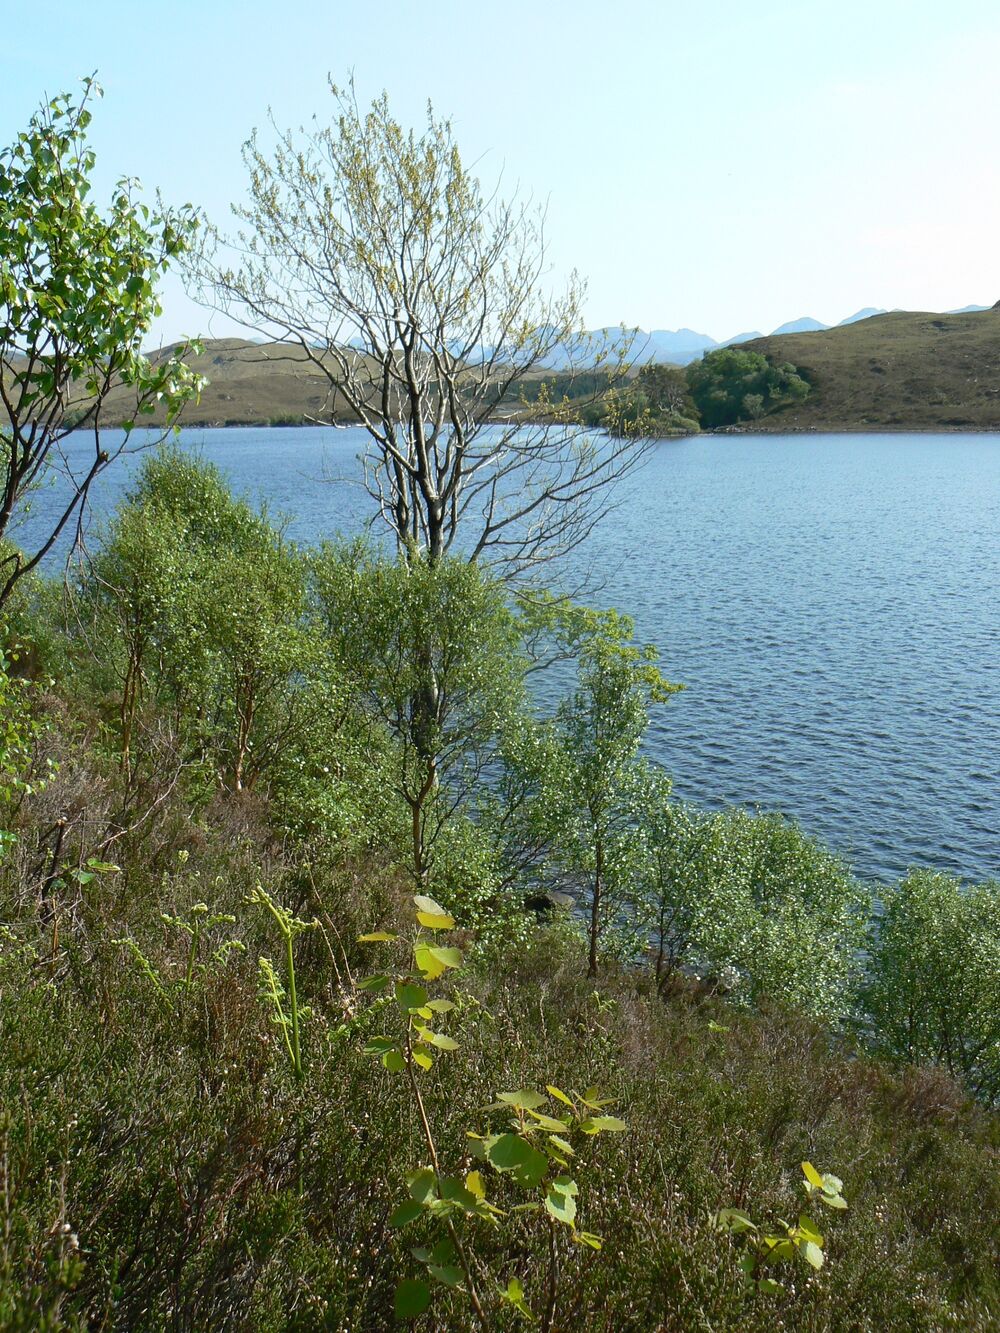 A mix of young trees grow on a low hillside beside a loch.